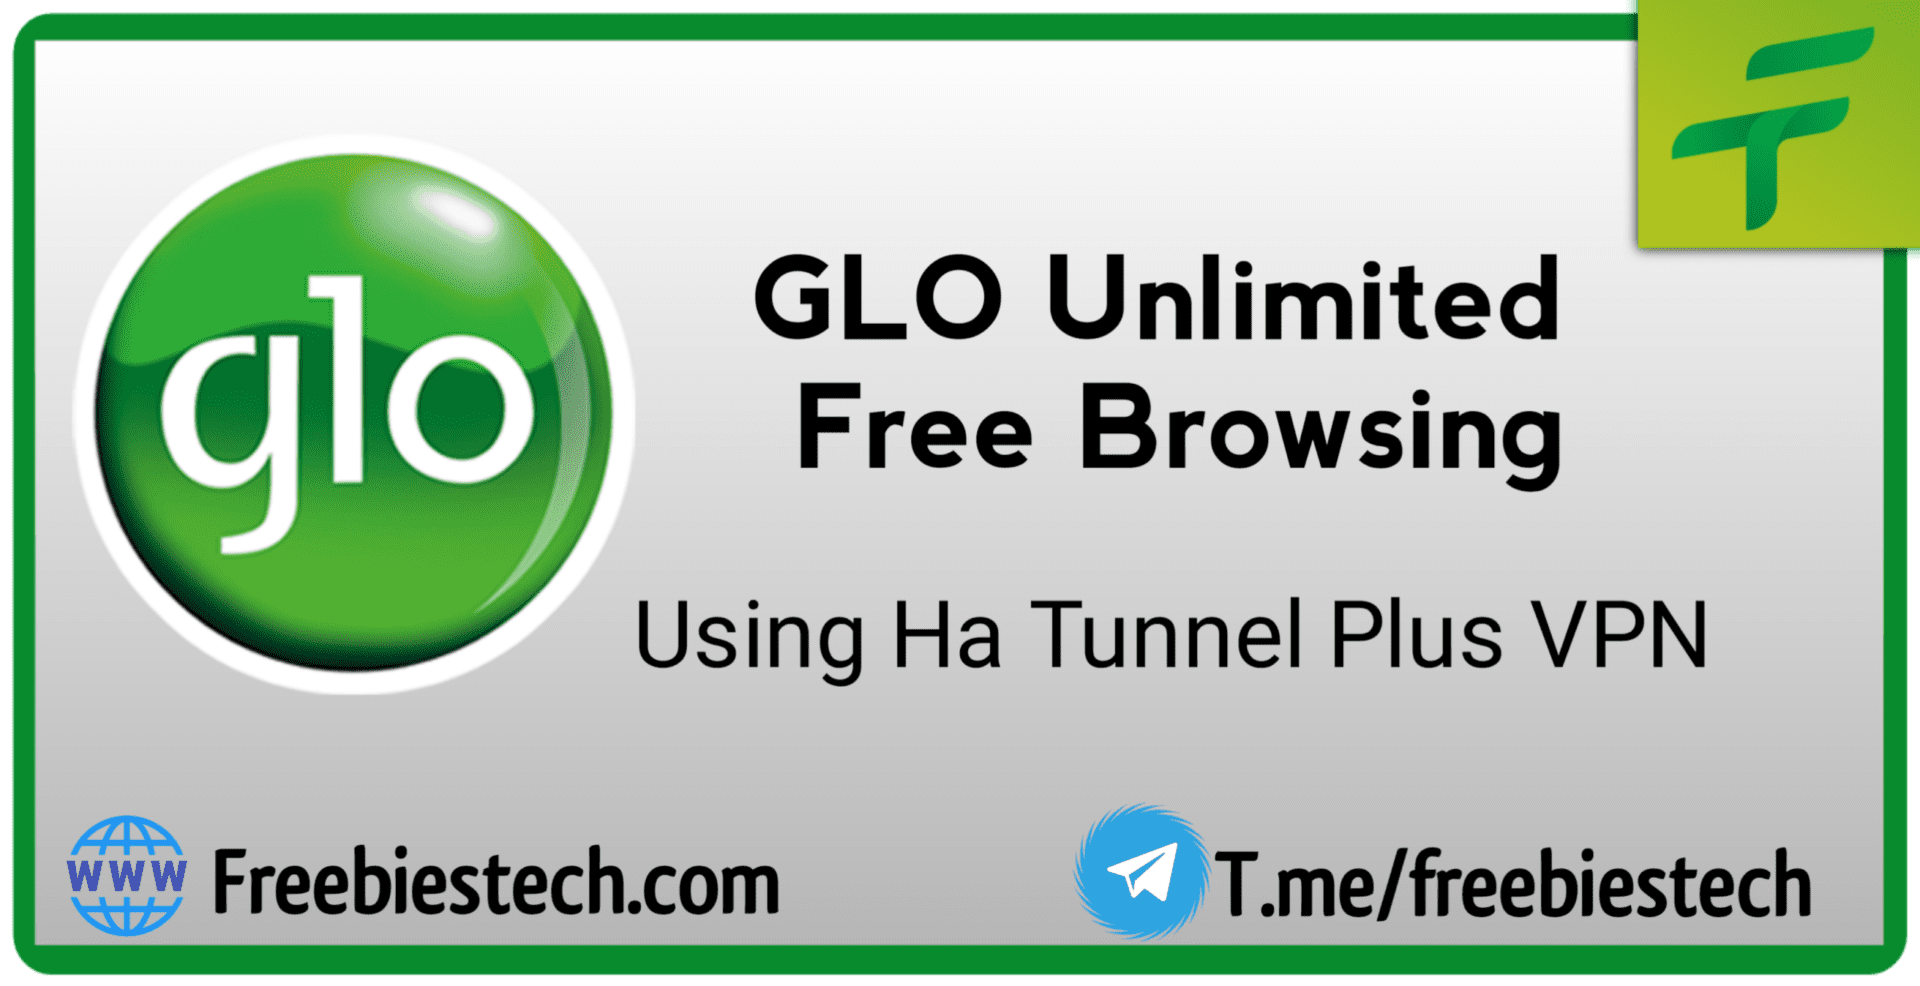 GLO Unlimited